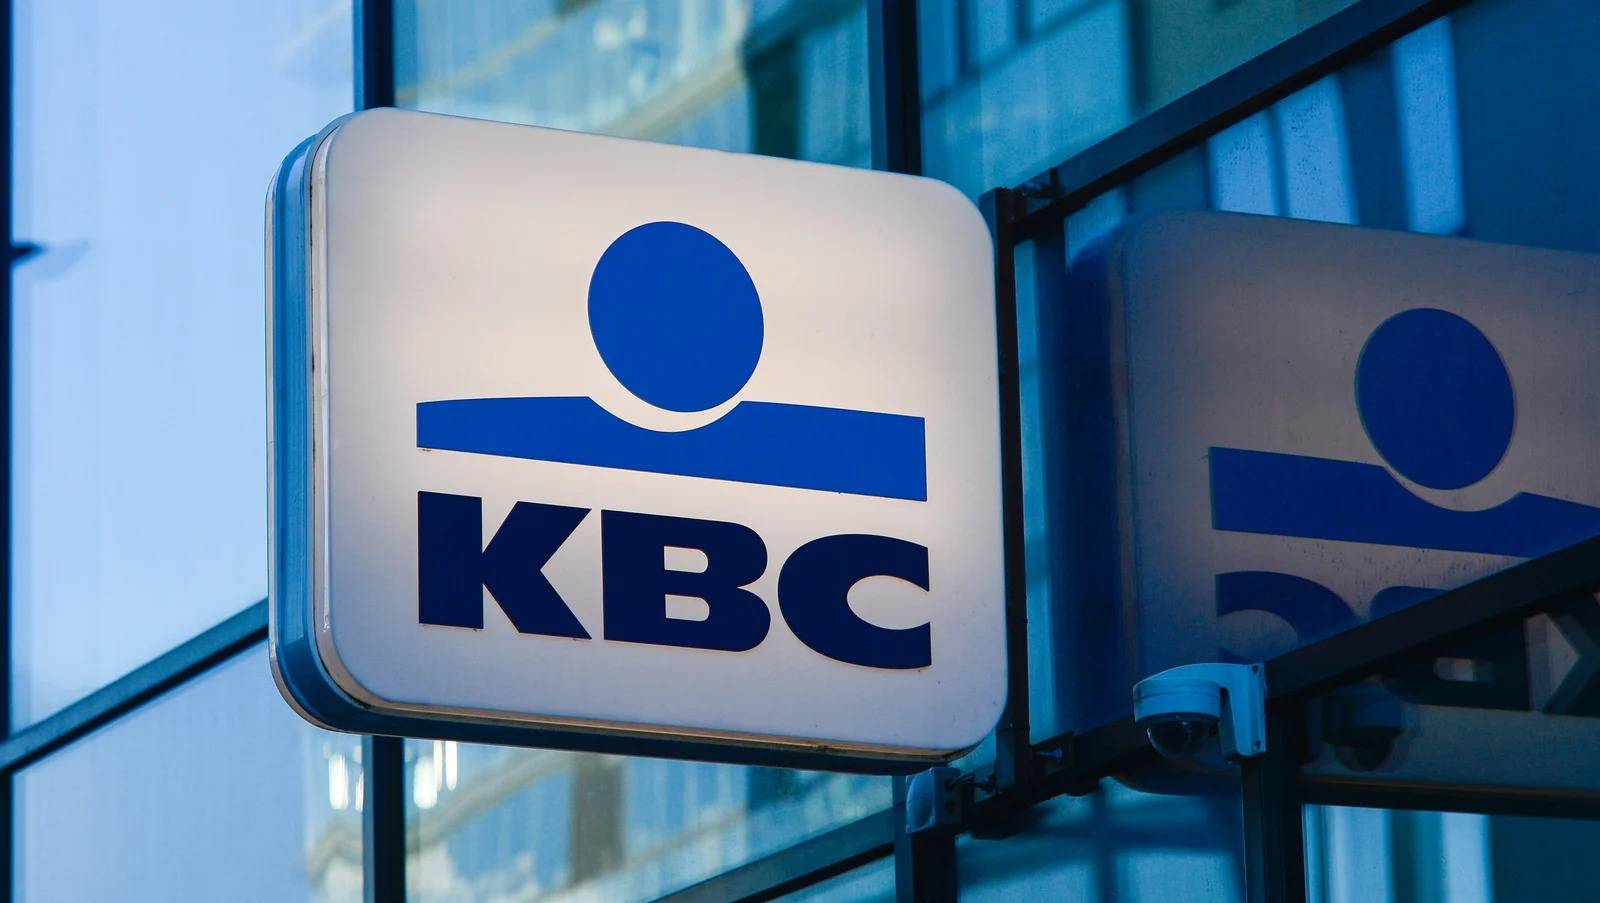 13-astounding-facts-about-kbc-bank